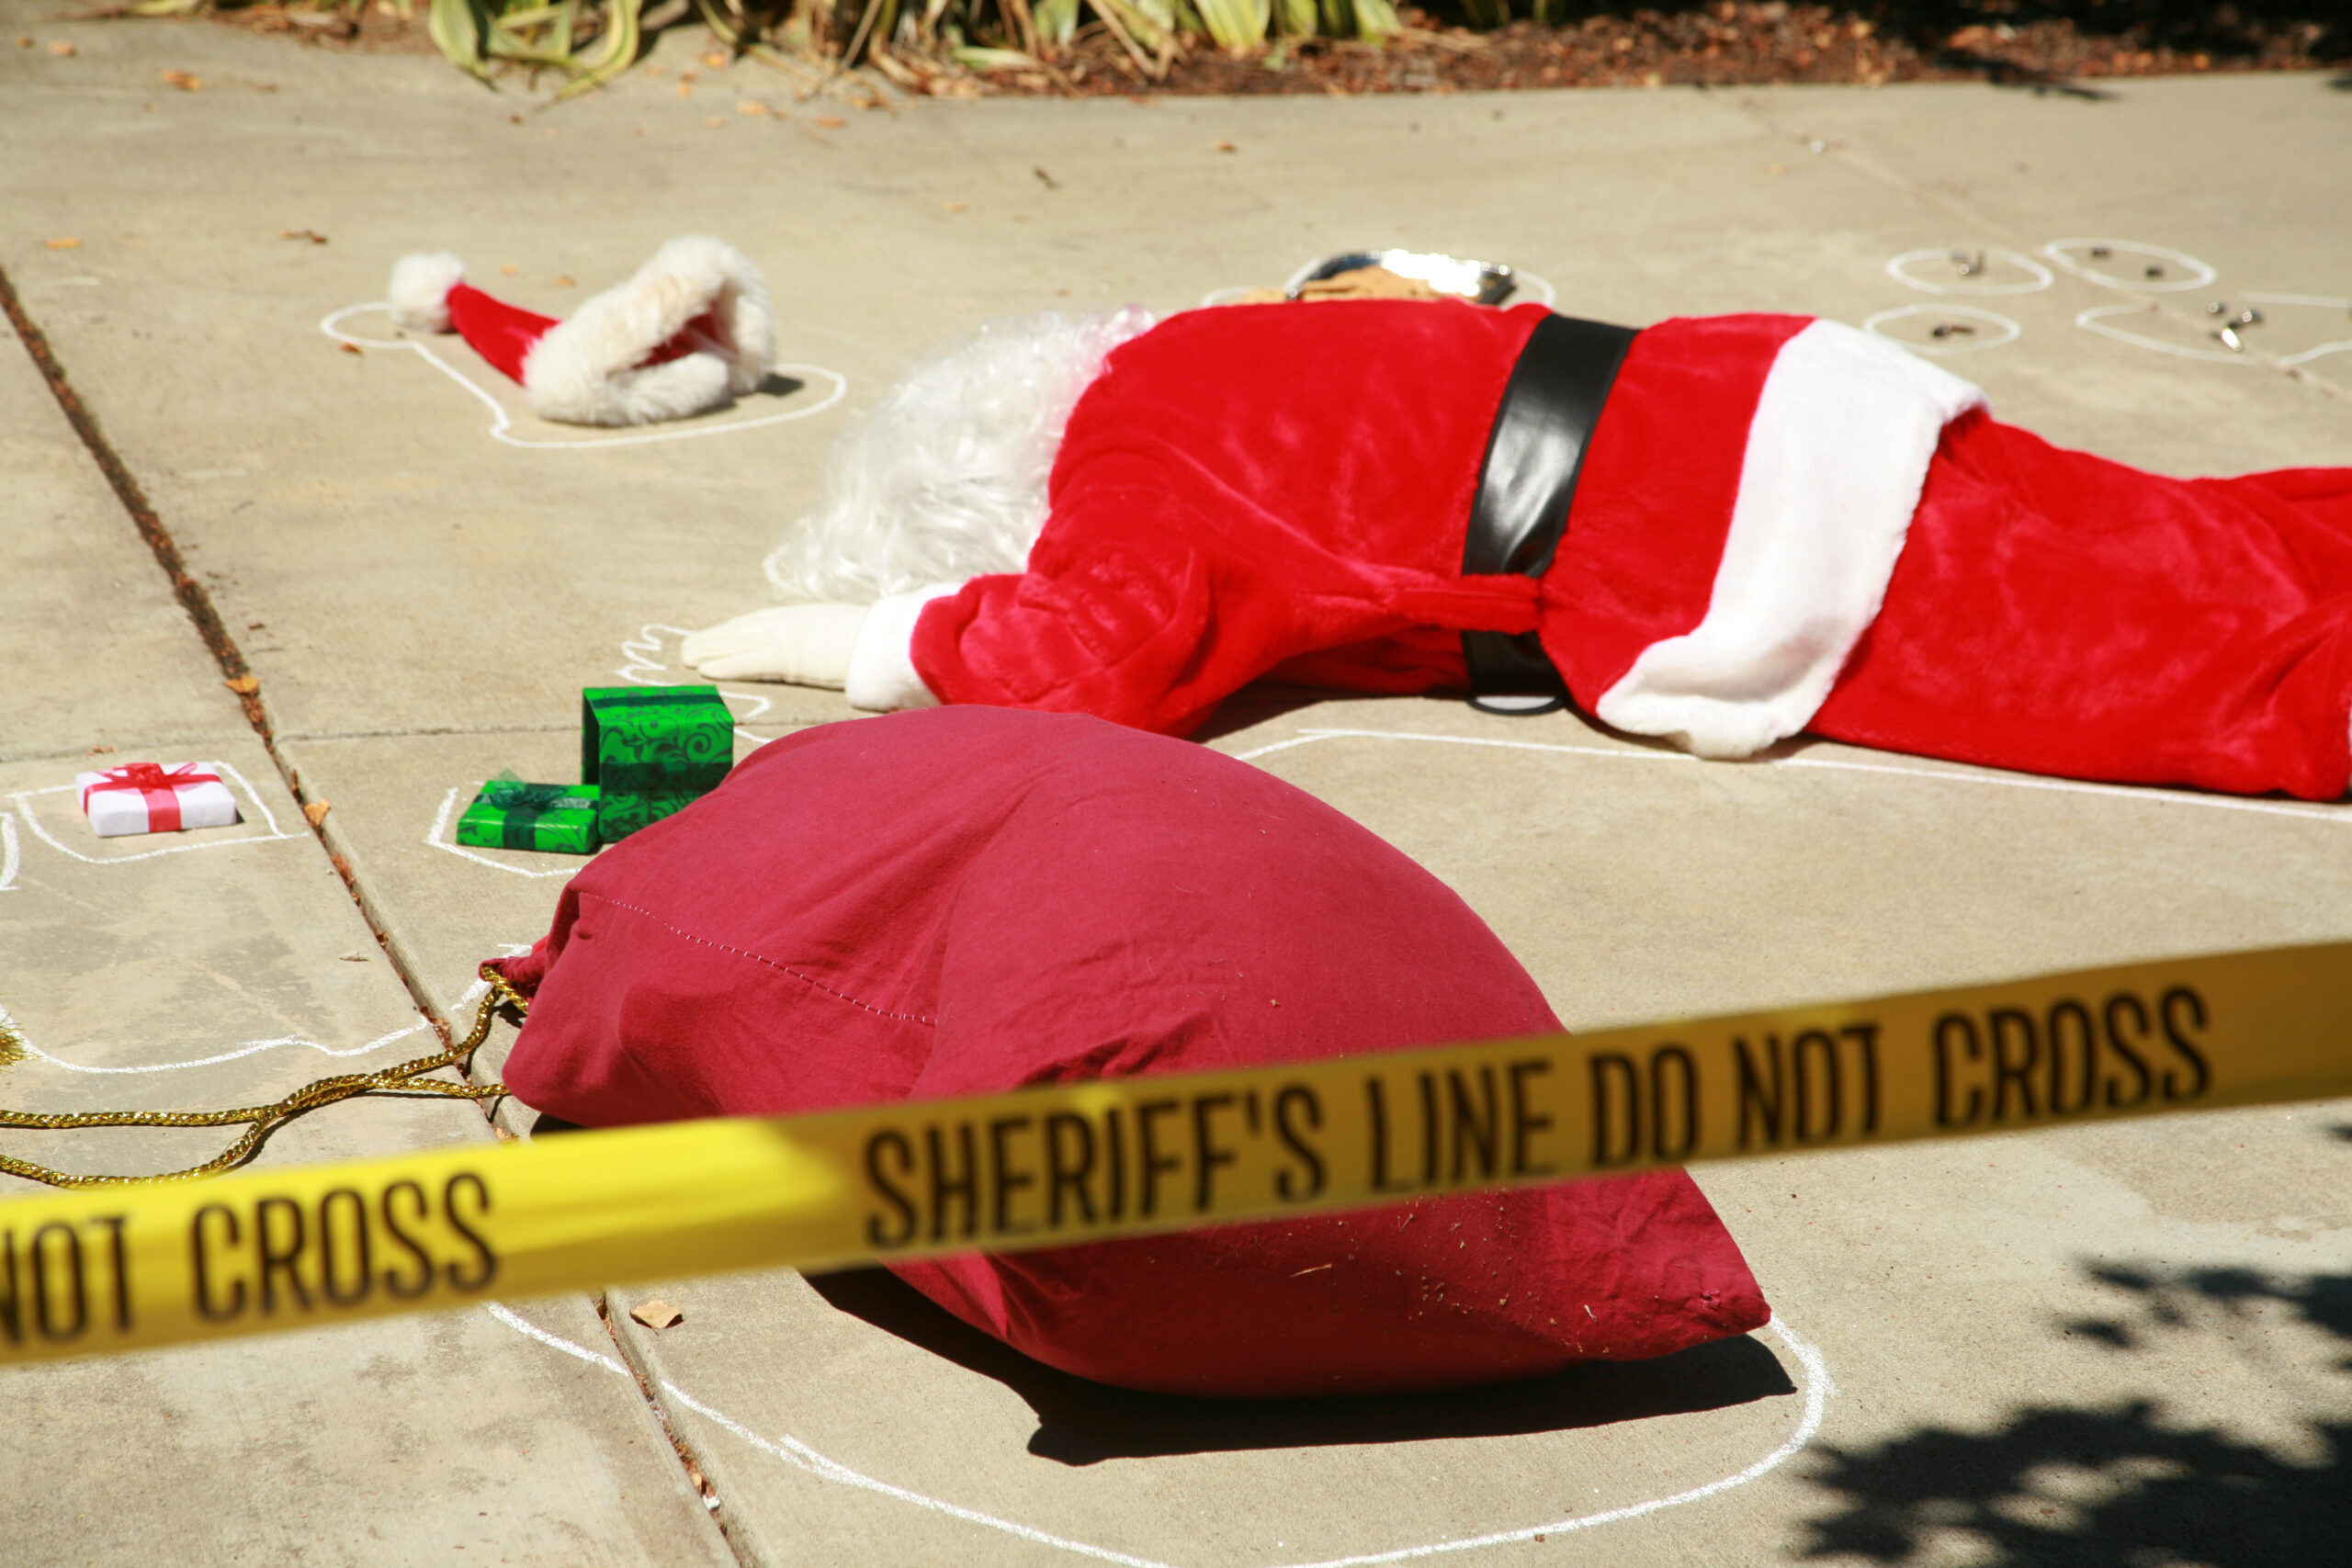 An evangelical cult leader assassinated Santa Claus in front of a bunch of kids